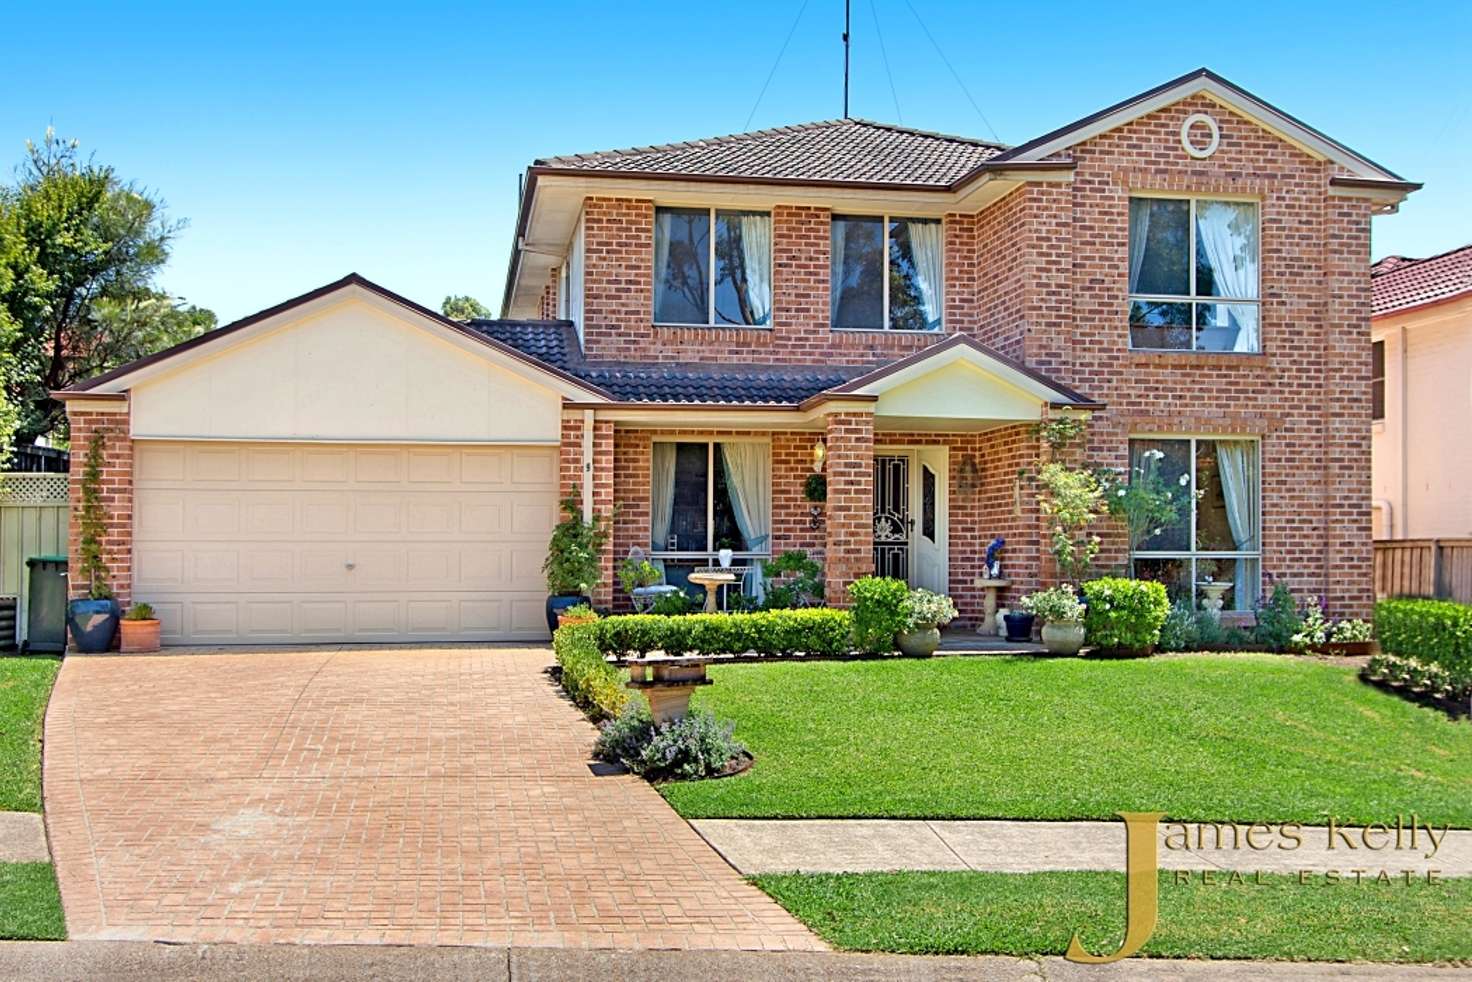 Main view of Homely house listing, 9 Craigmore Dr, Kellyville NSW 2155